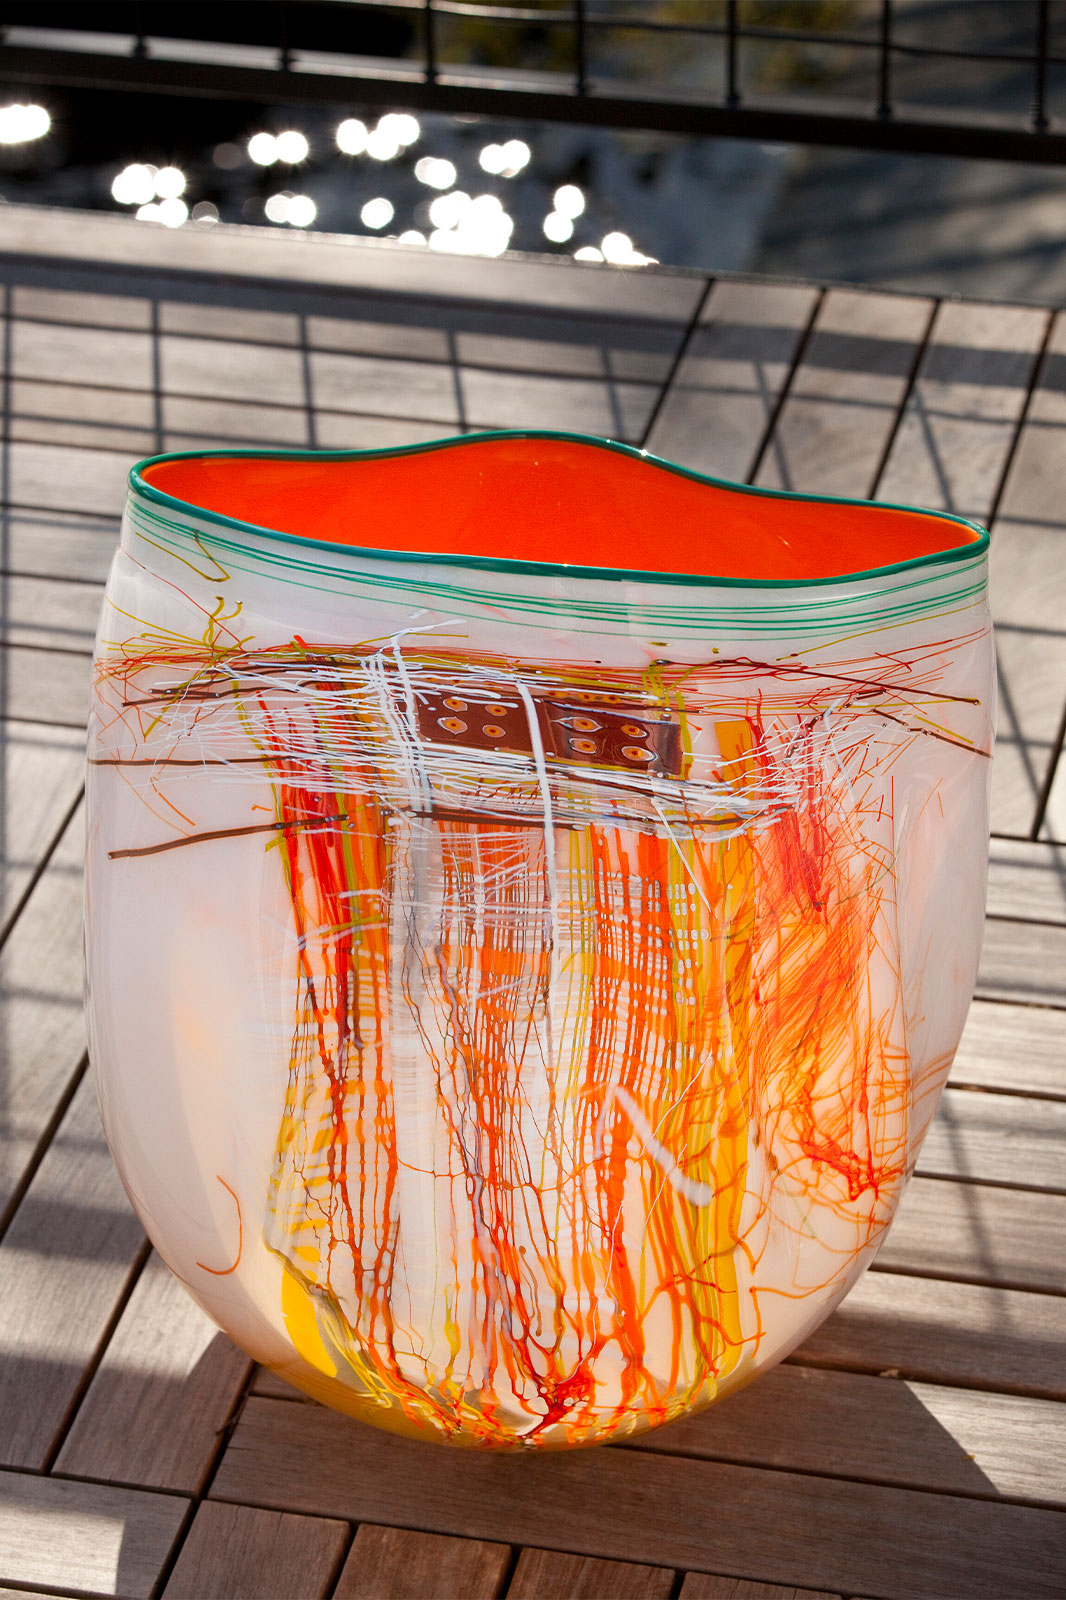 Tangerine White Soft Cylinder with Turquoise Lip Wrap, 2012 by Dale Chihuly